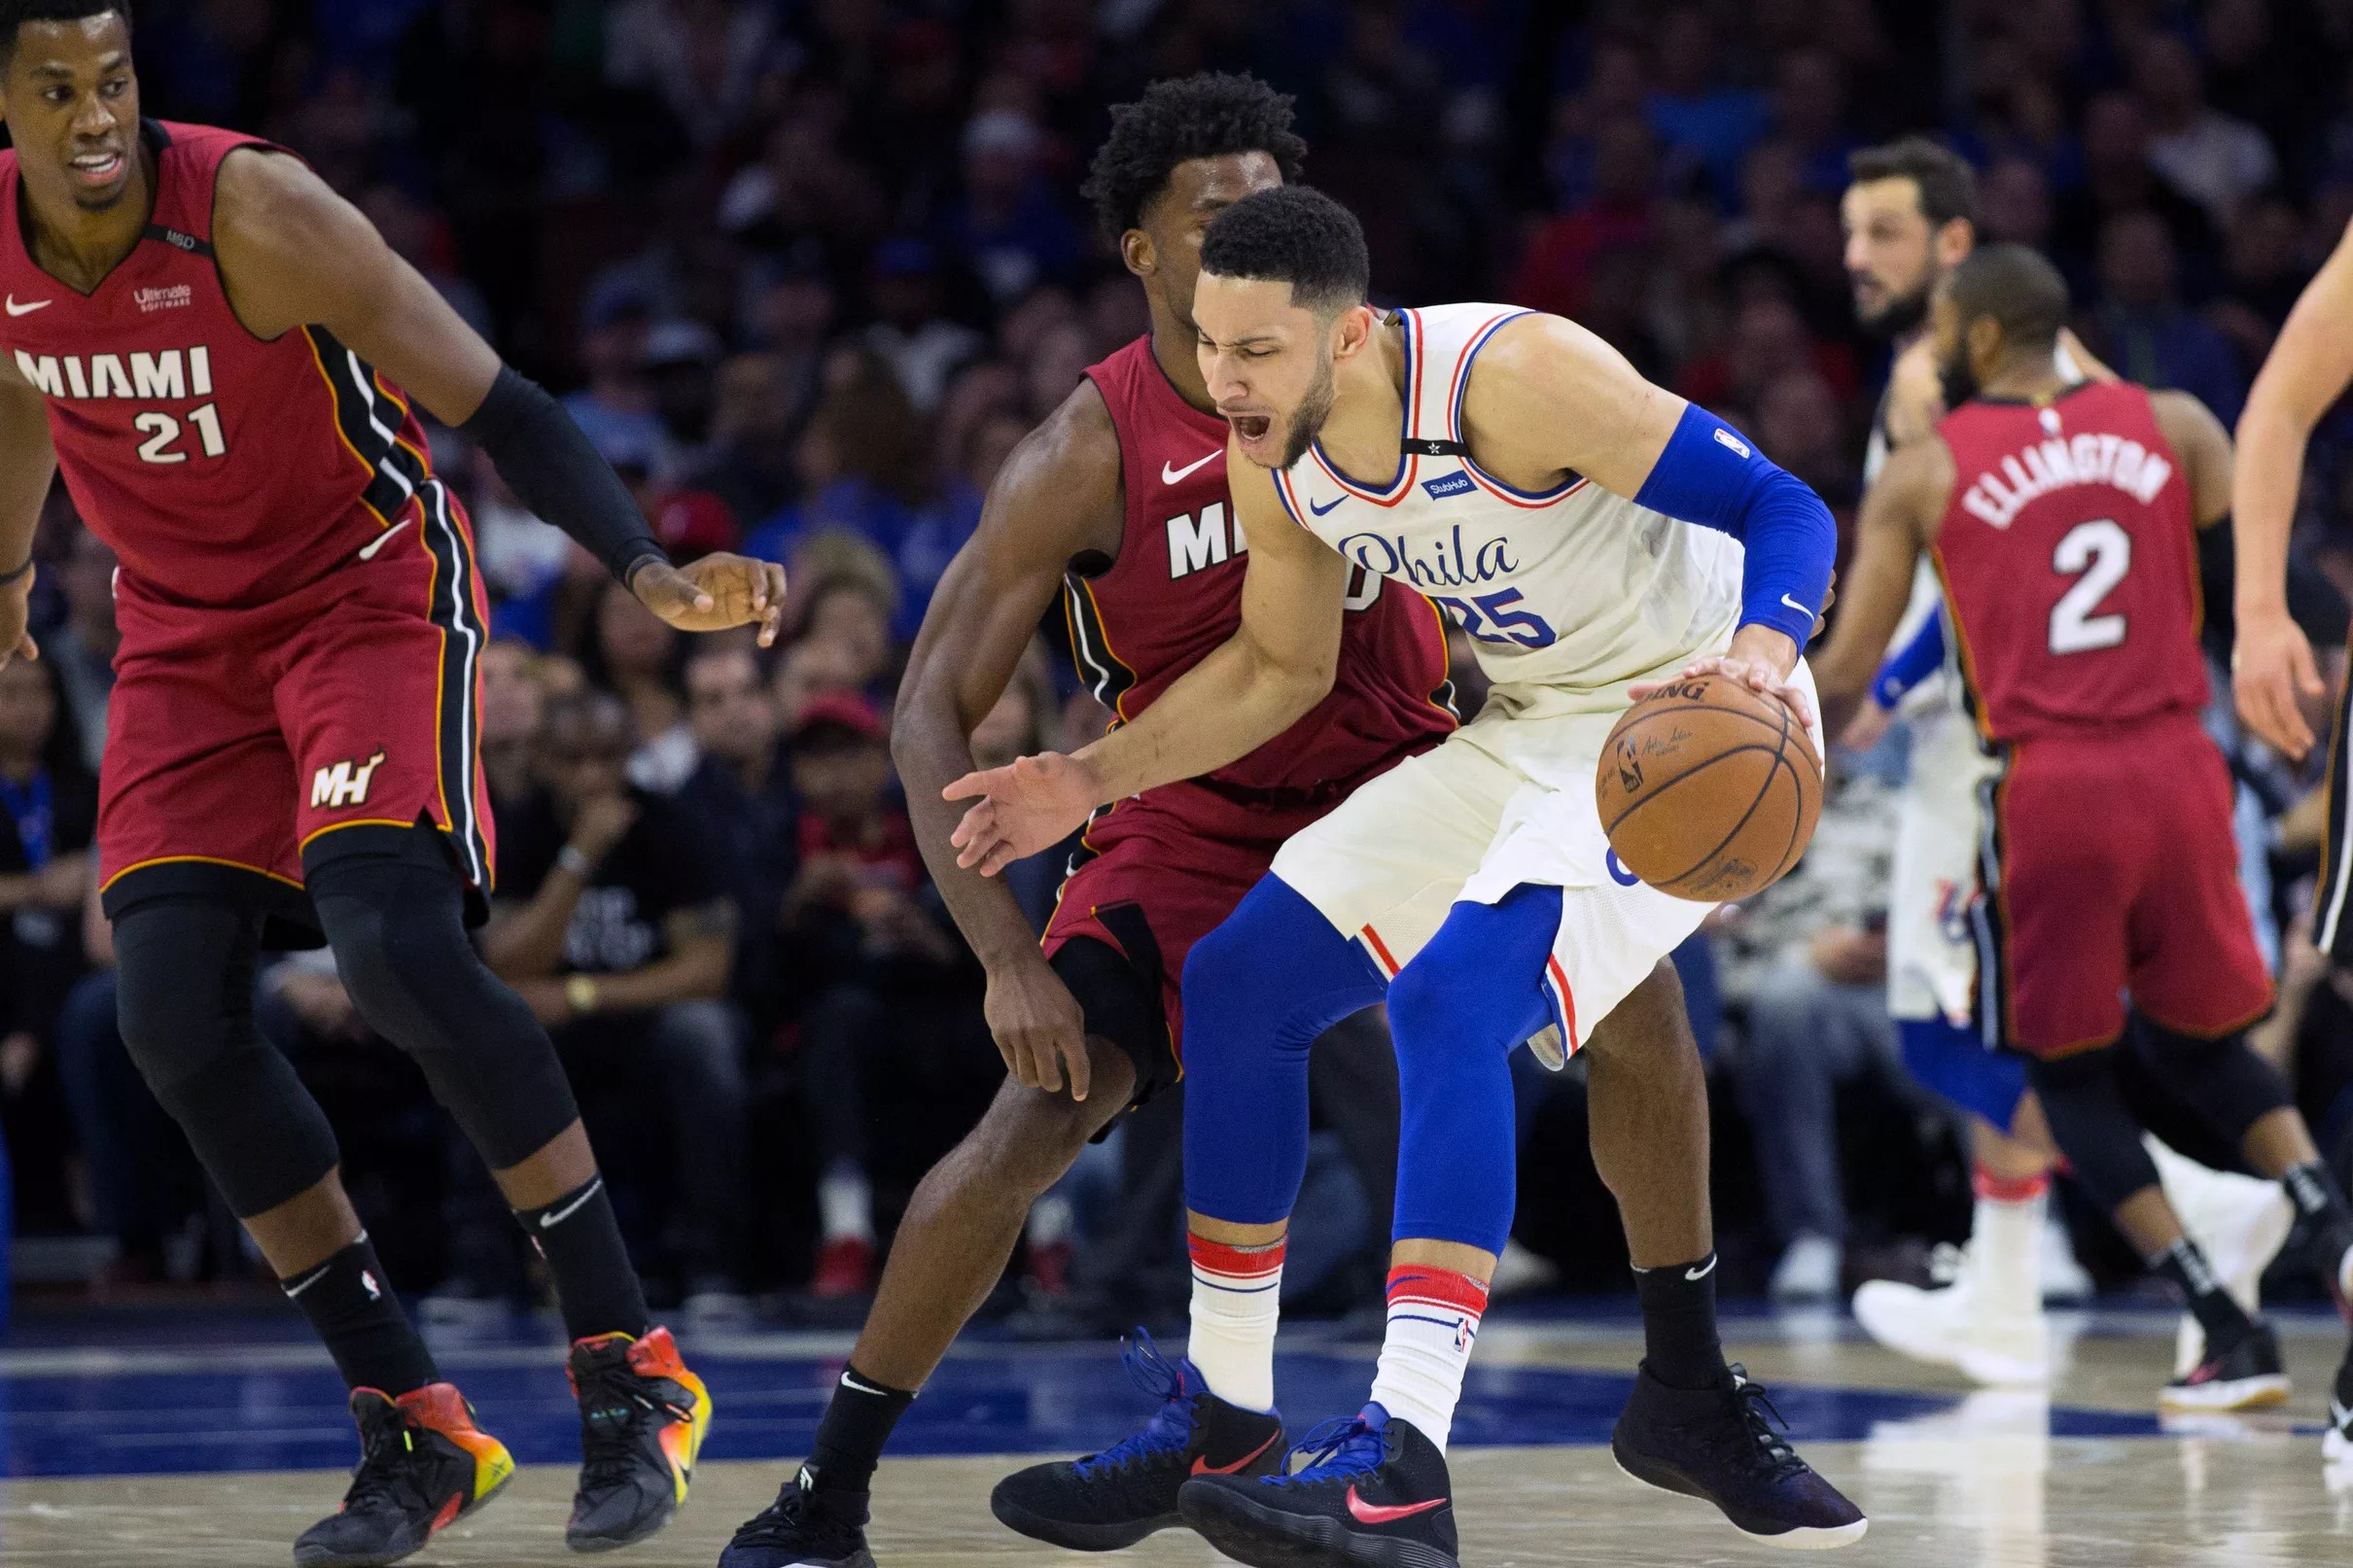 One play defined the Miami Heat’s playoff win over the Philadelphia 76ers